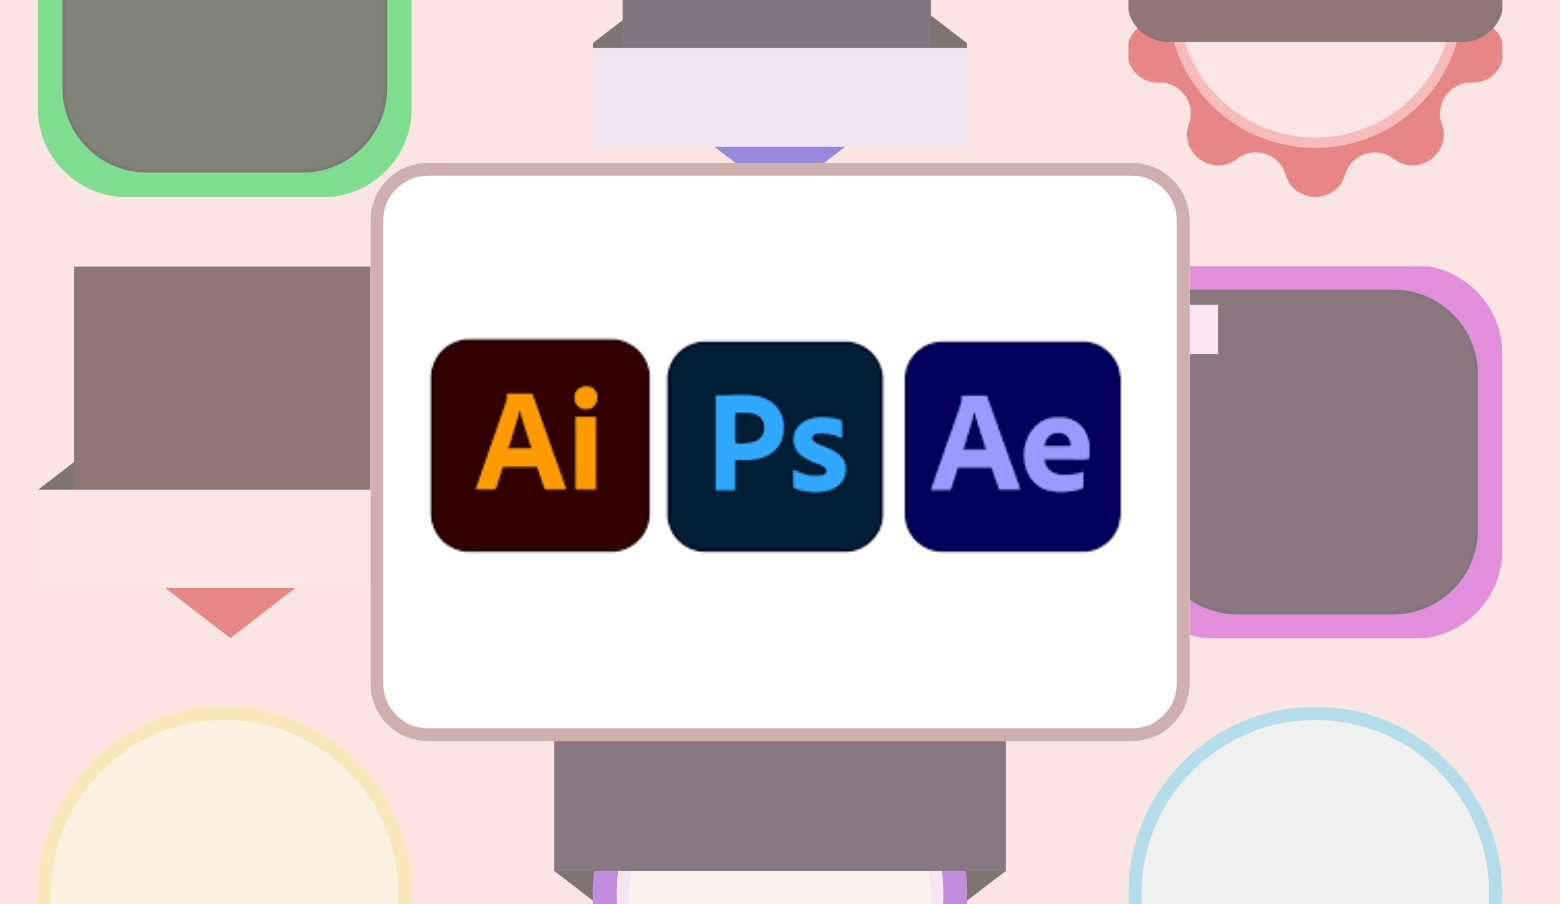 Adobe Digital Badges Your Path to Becoming a Creative Pro